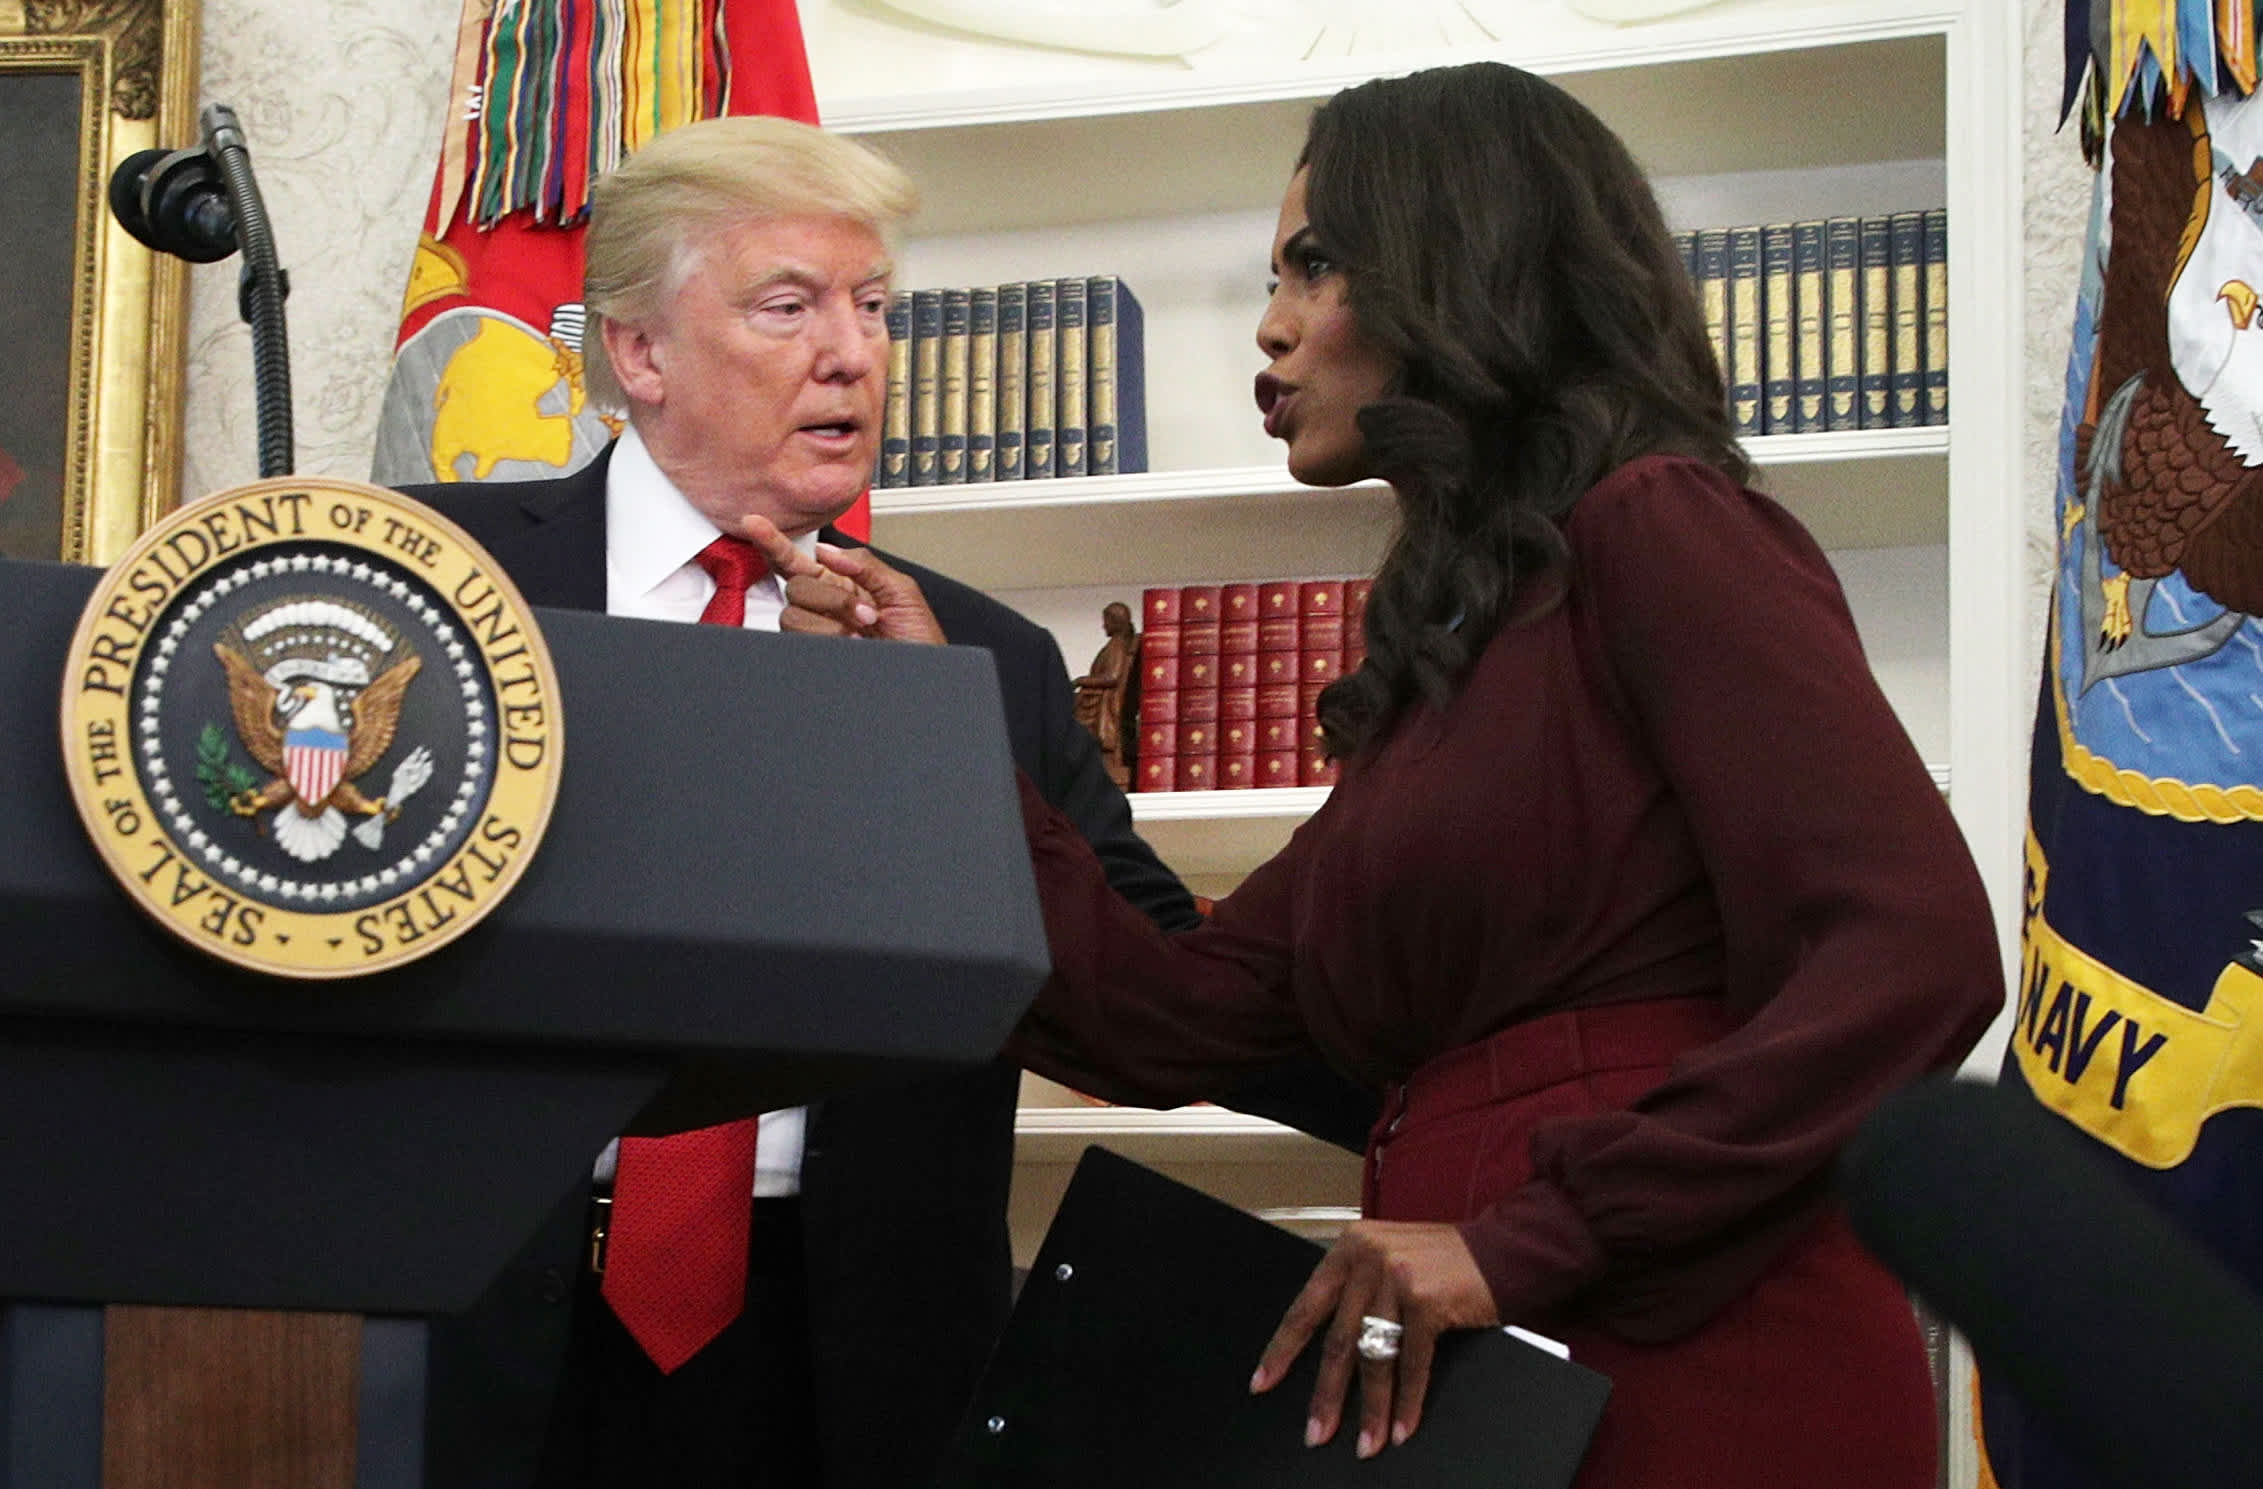 Pictures of omarosa